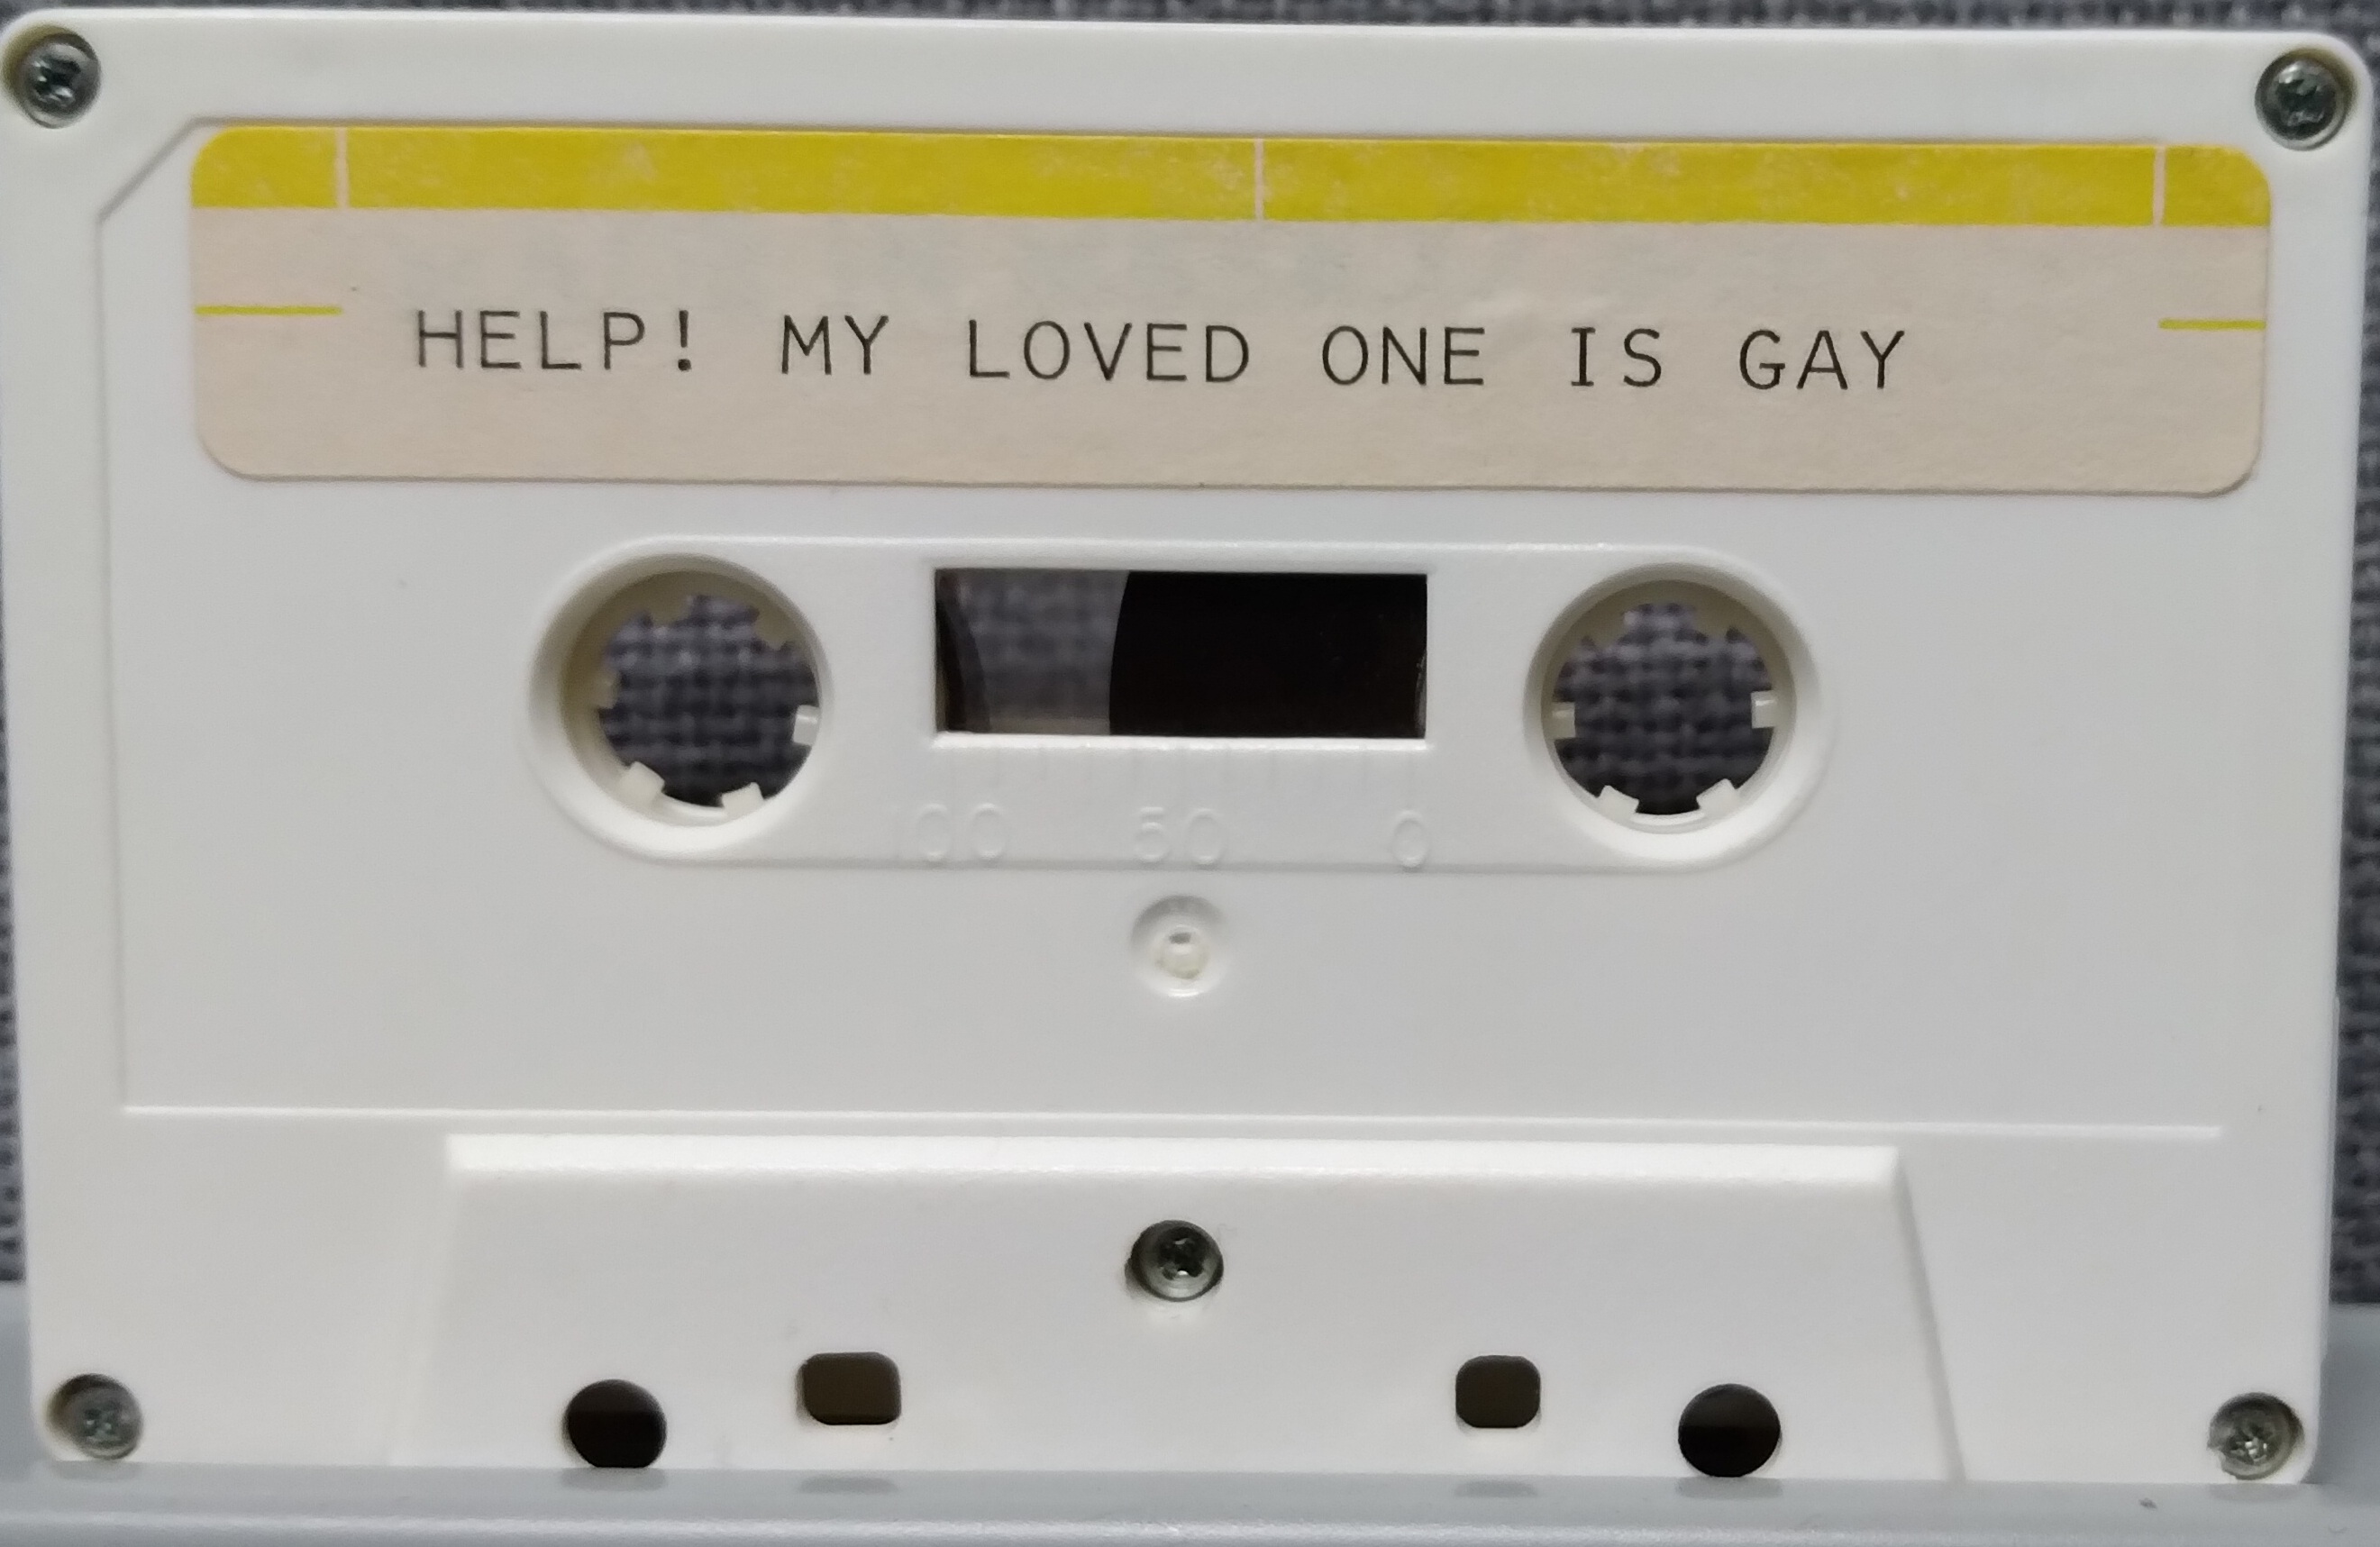 My loved one is gay tape